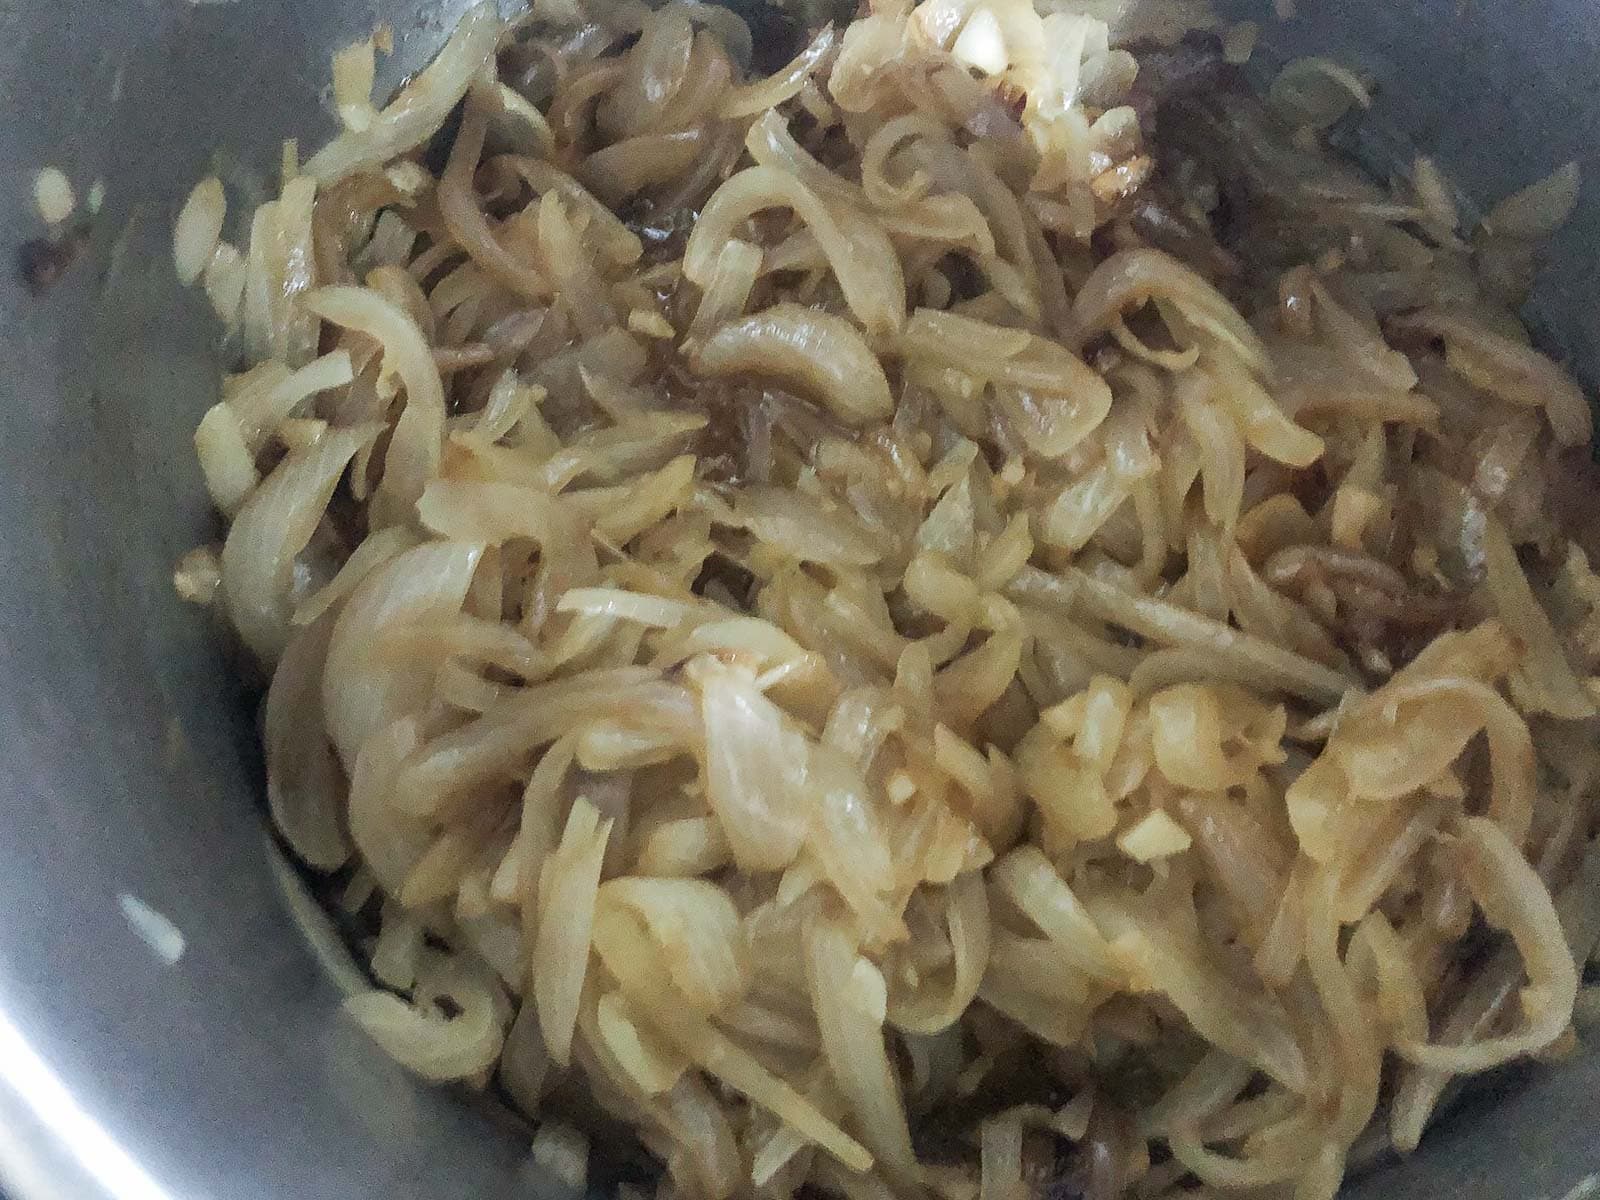 Sautéed sliced onions cooked until just slightly golden.